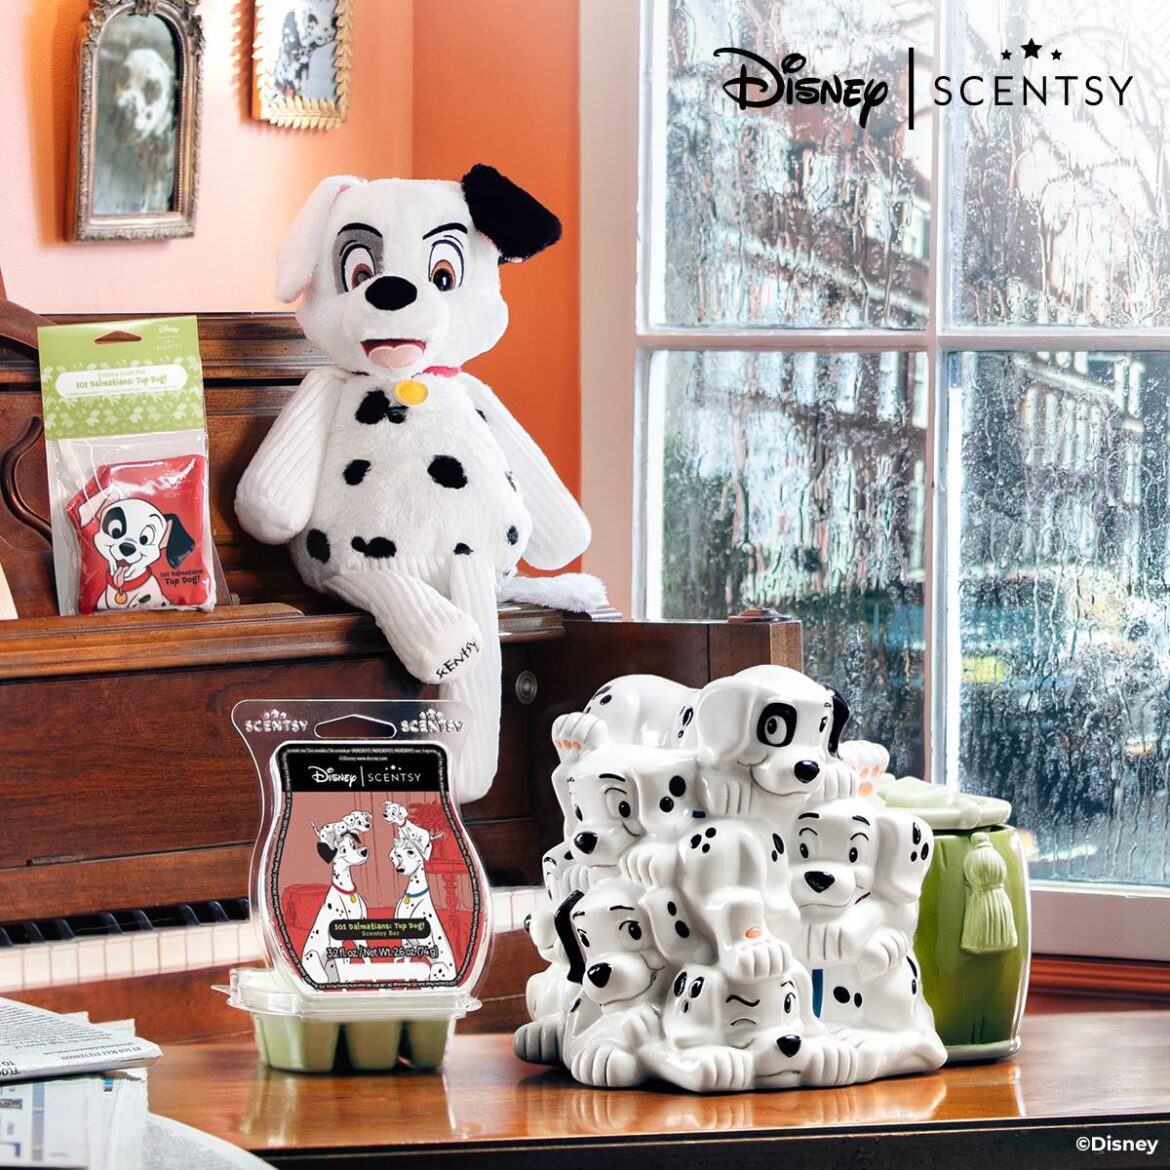 Pile on the fun with Disney’s 101 Dalmatians Scentsy Collection